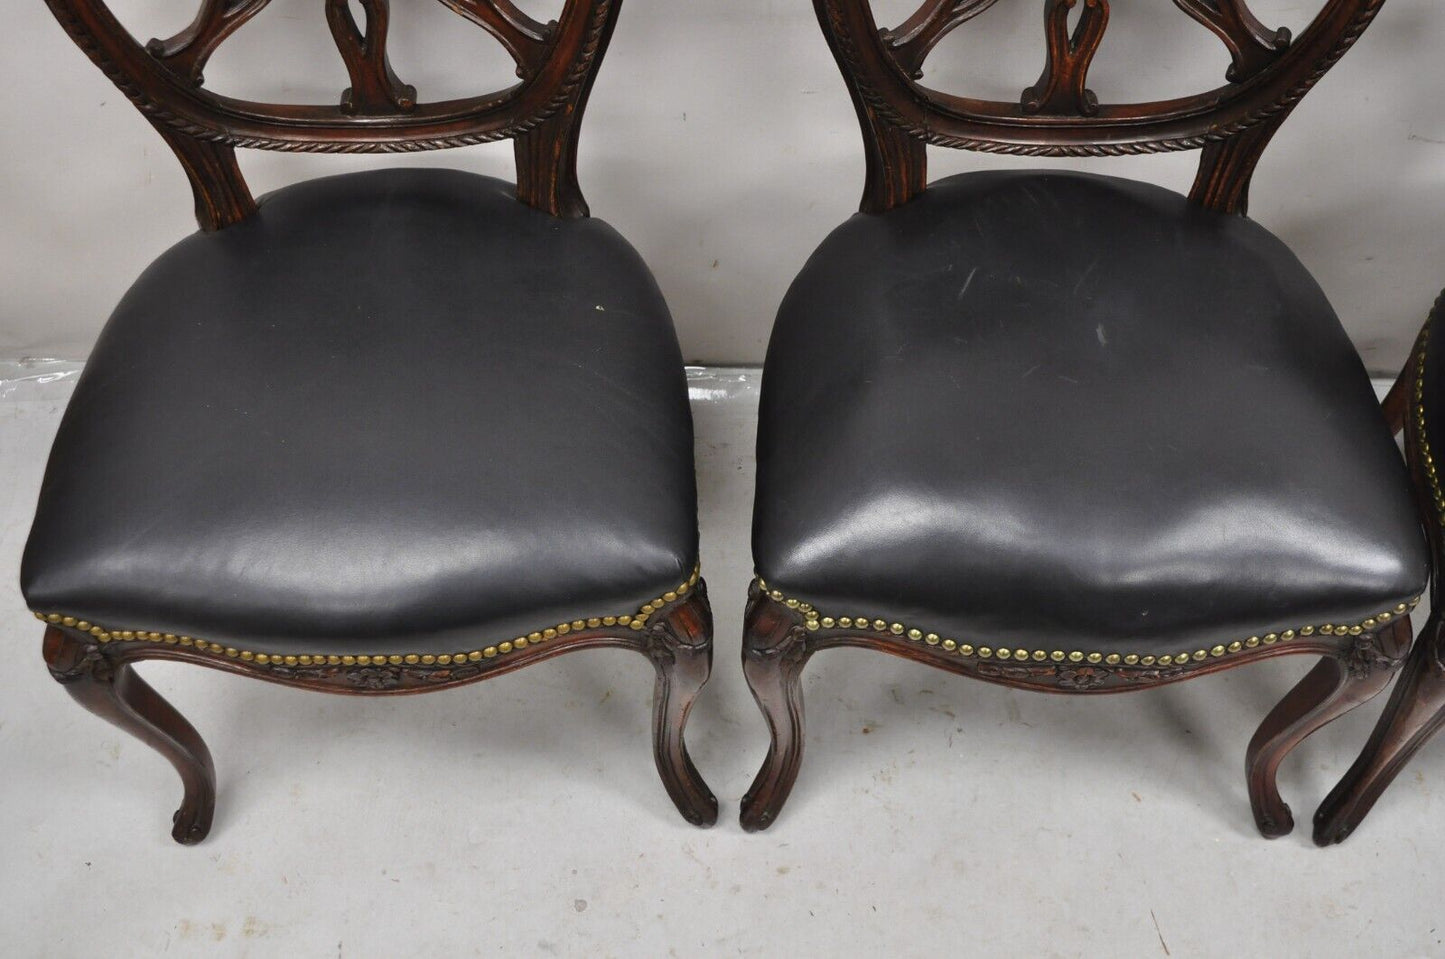 Antique Italian Neoclassical Pinwheel Carved Mahogany Dining Chairs - Set of 4